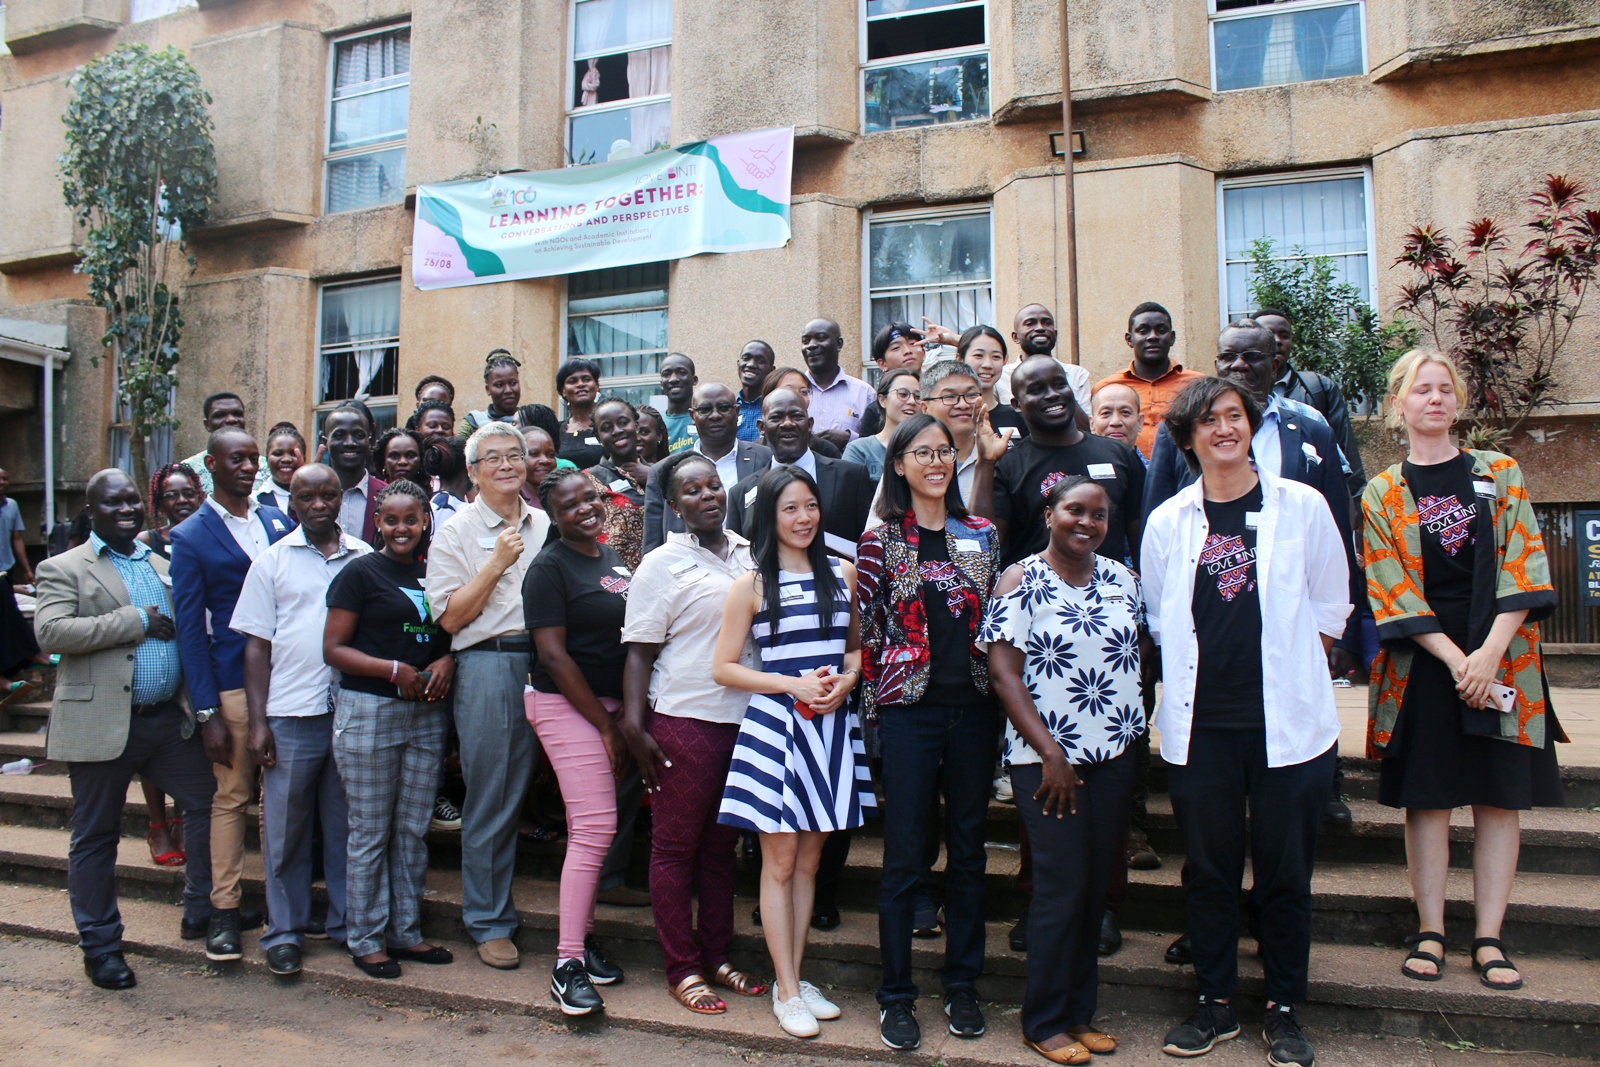 Participants in the Love Binti International Conference held on 26th August 2022 at Makerere University pose for a group photograph.